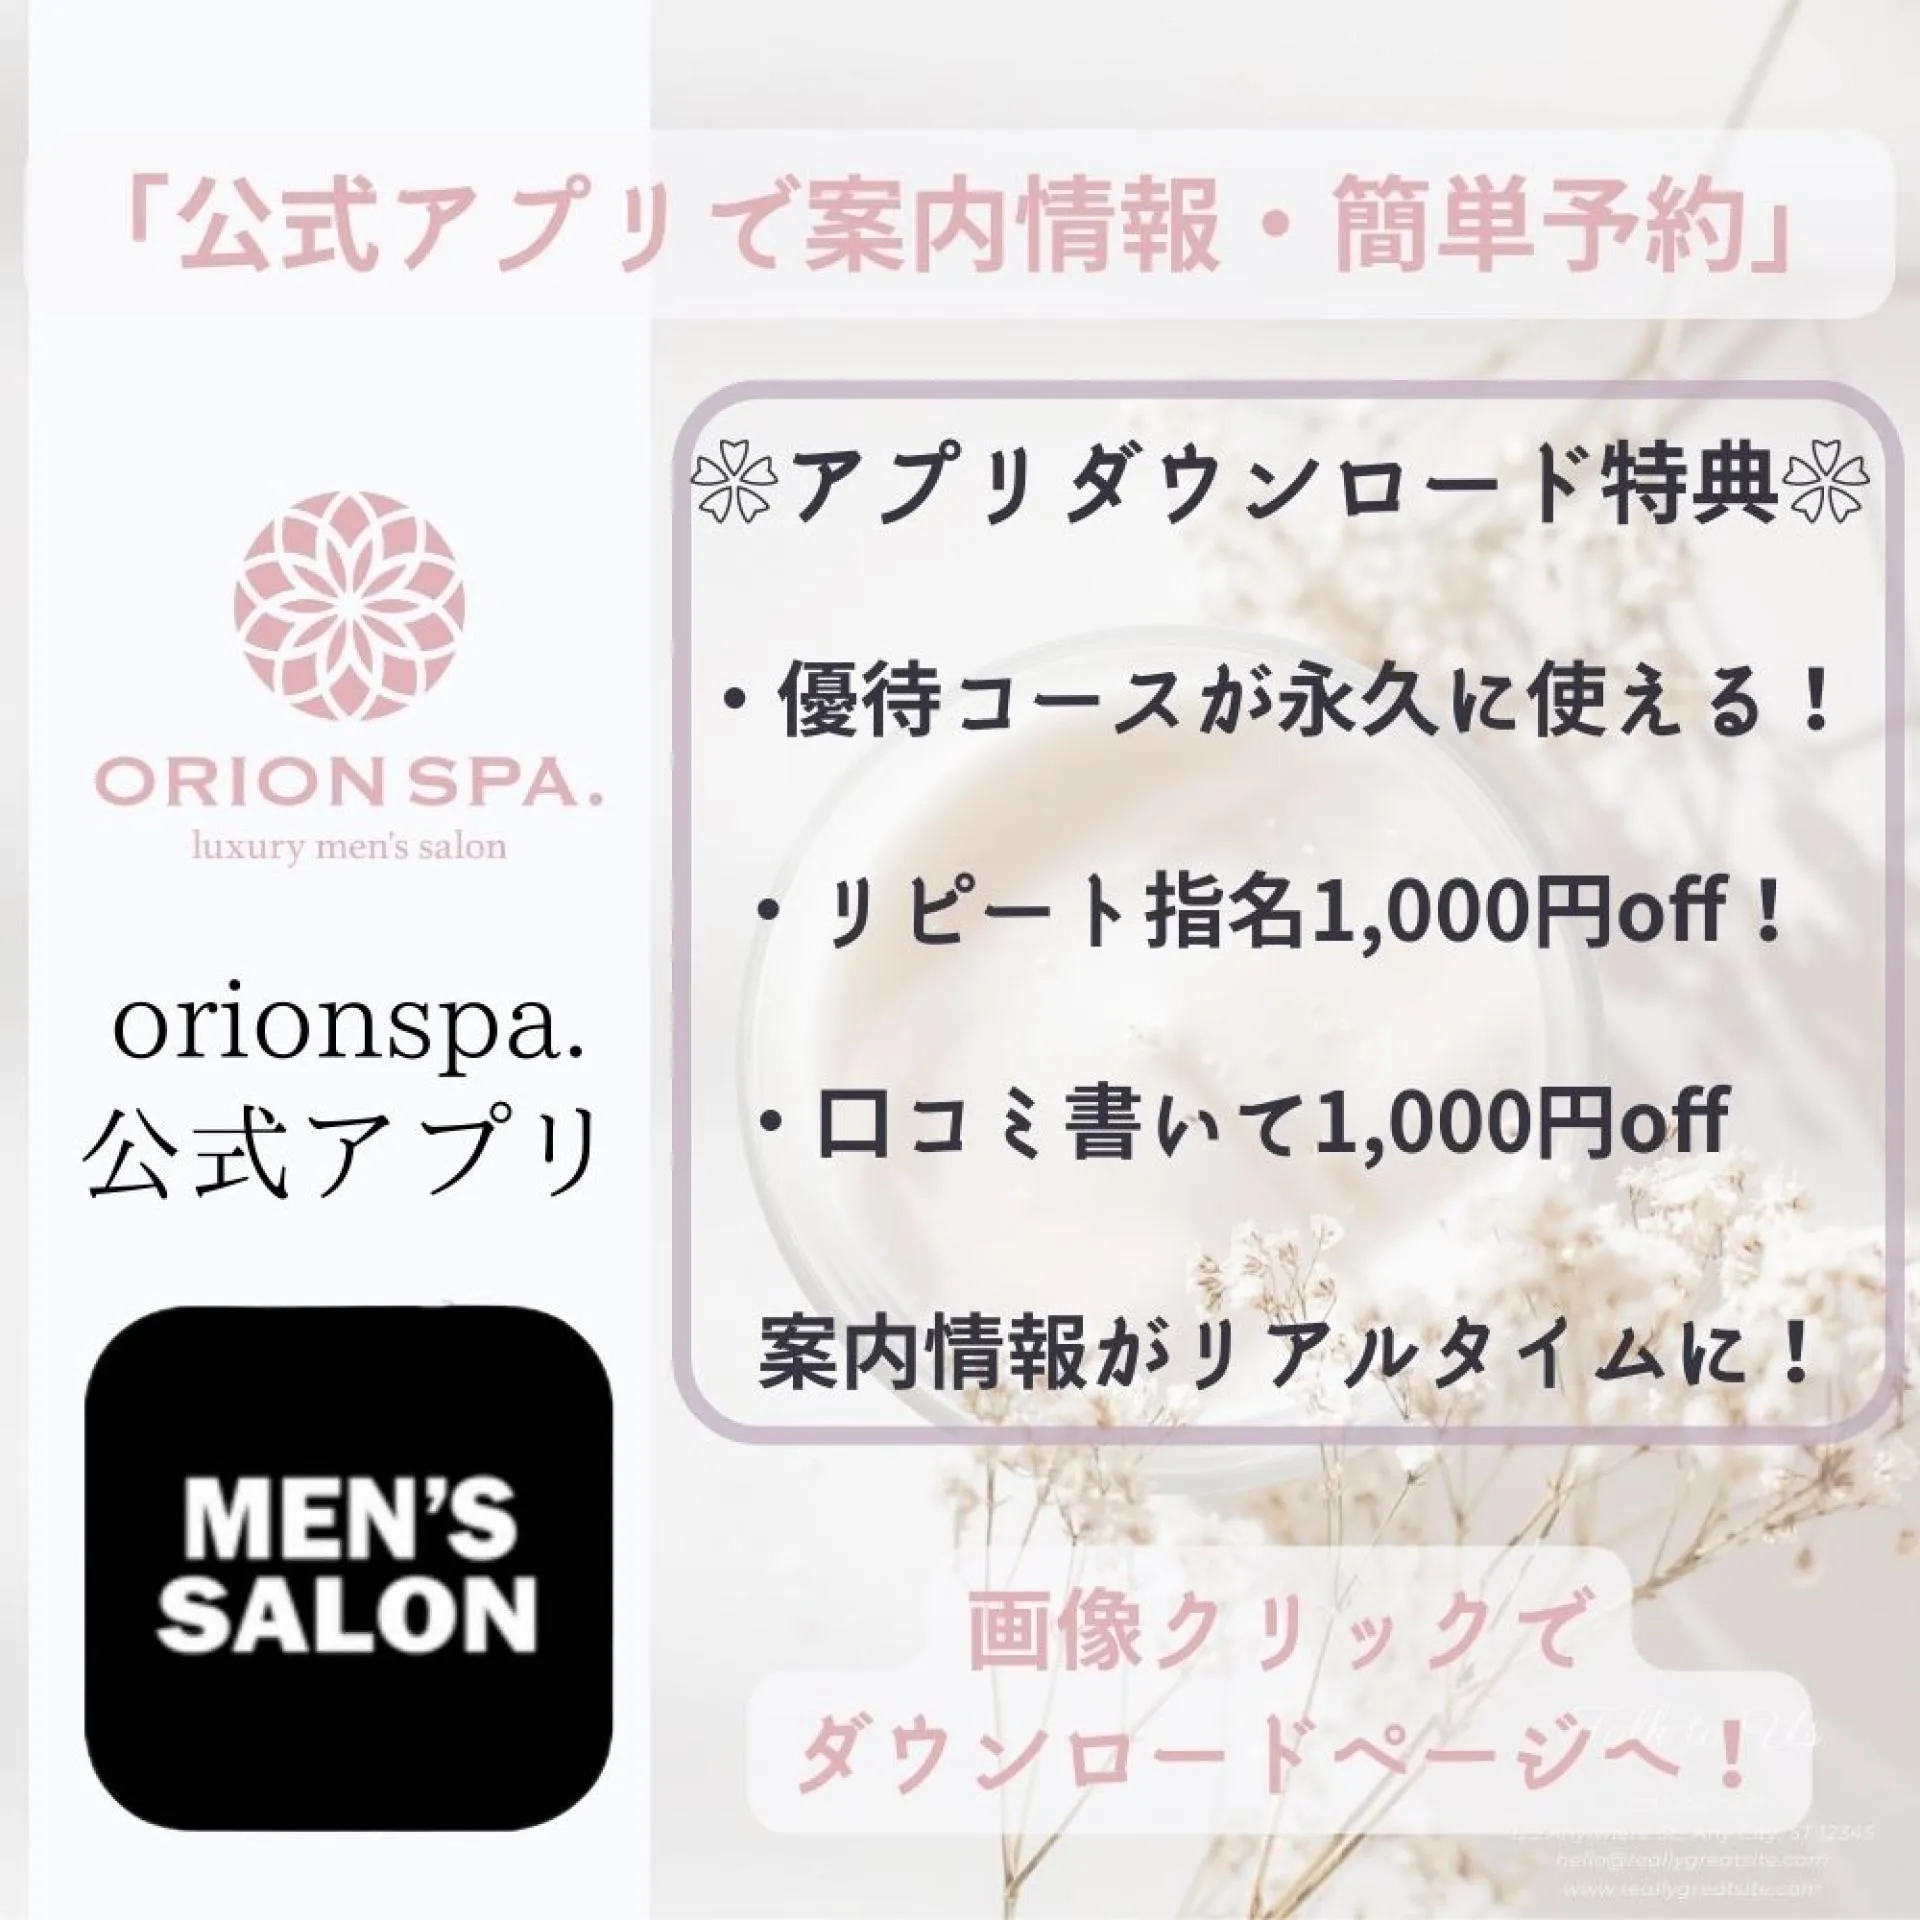 ORION SPA 専用予約アプリ